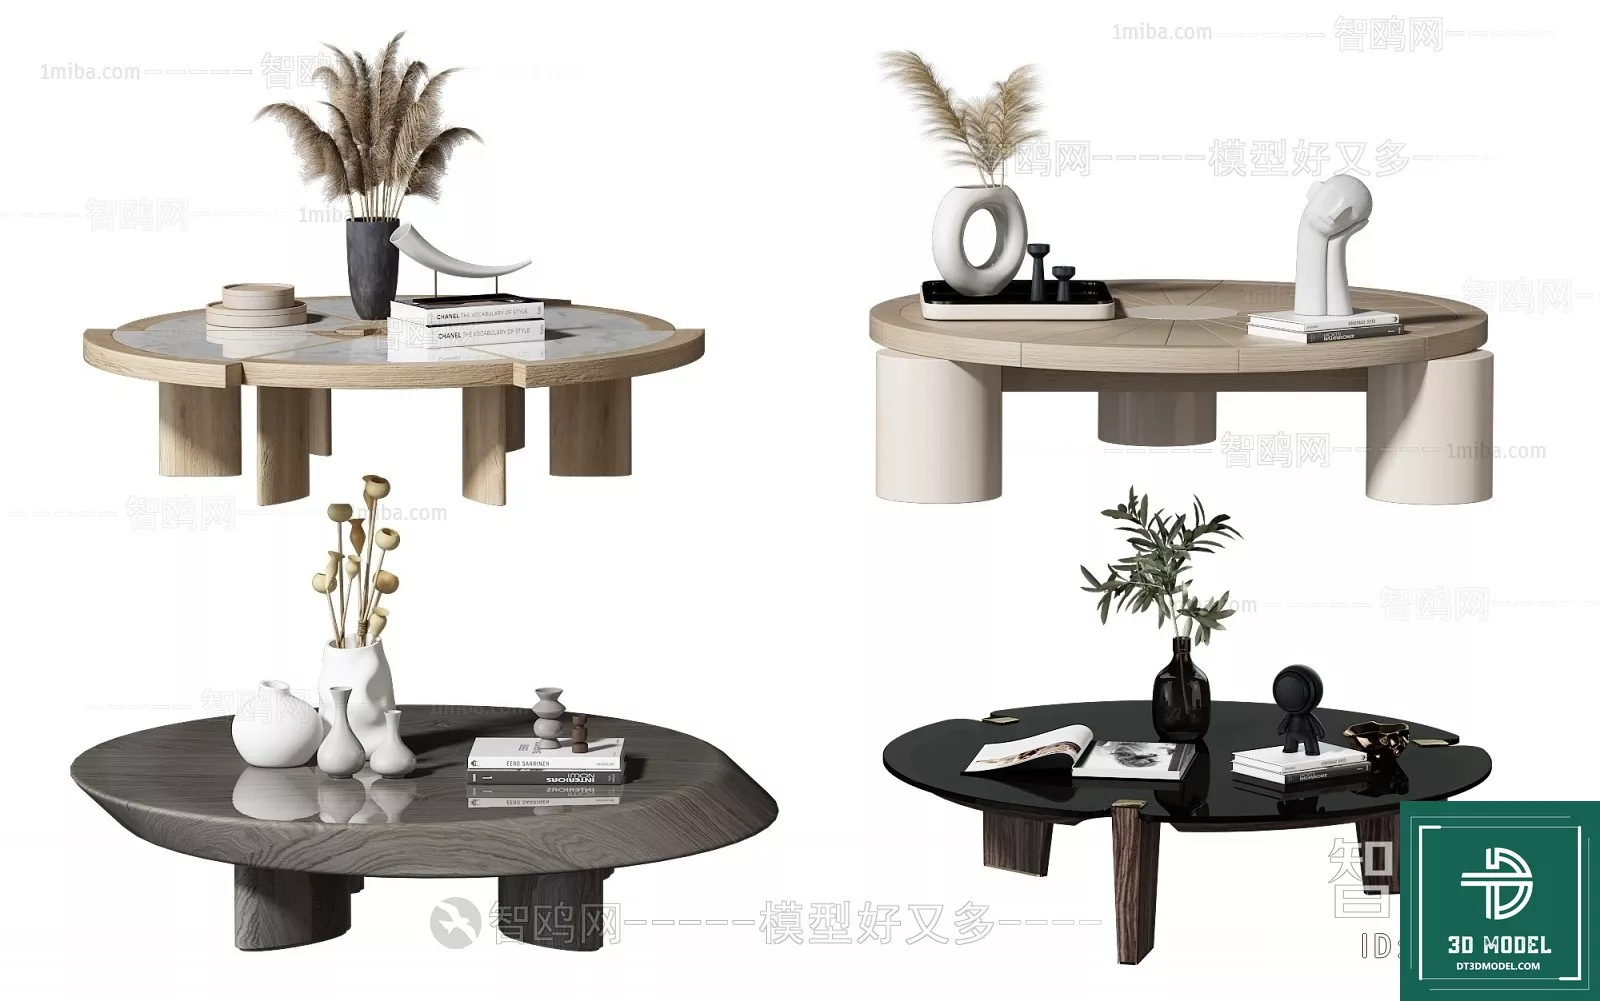 MODERN TEA TABLE - SKETCHUP 3D MODEL - VRAY OR ENSCAPE - ID14931